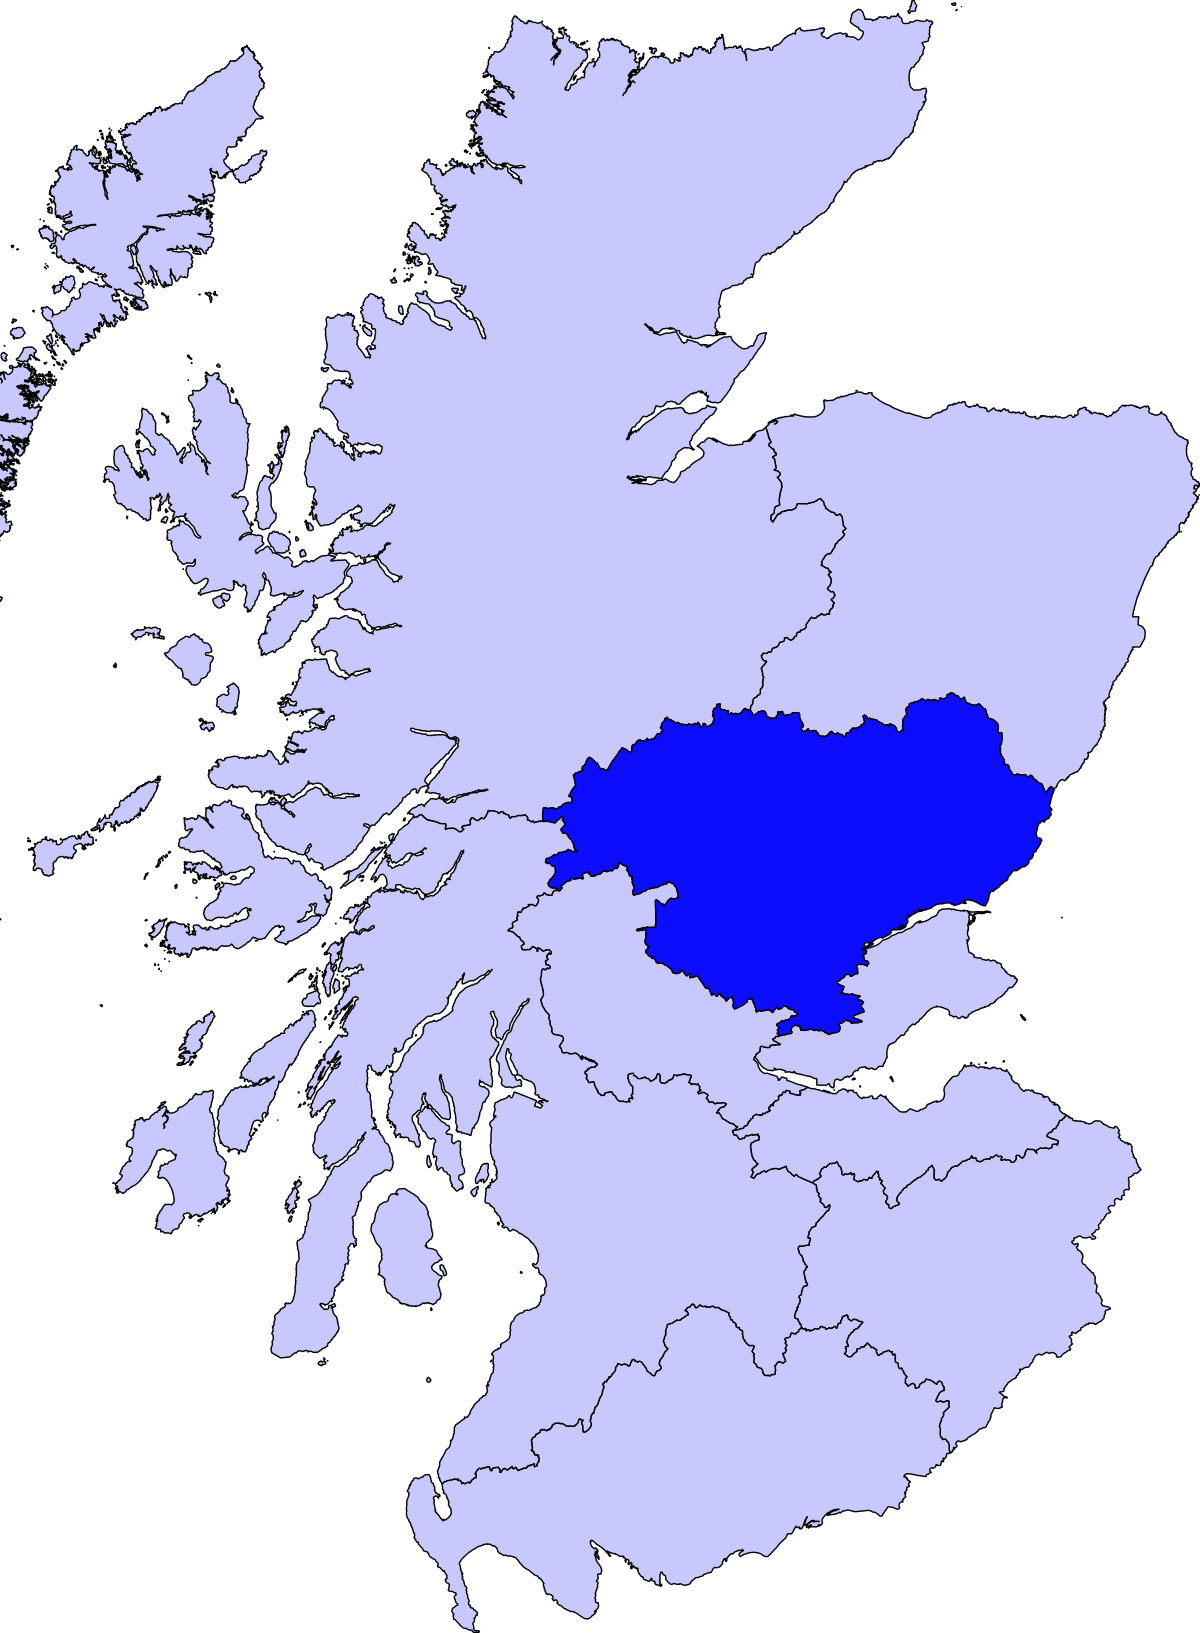 Map of the Tay Cities Region. Source: © University of Dundee 2021